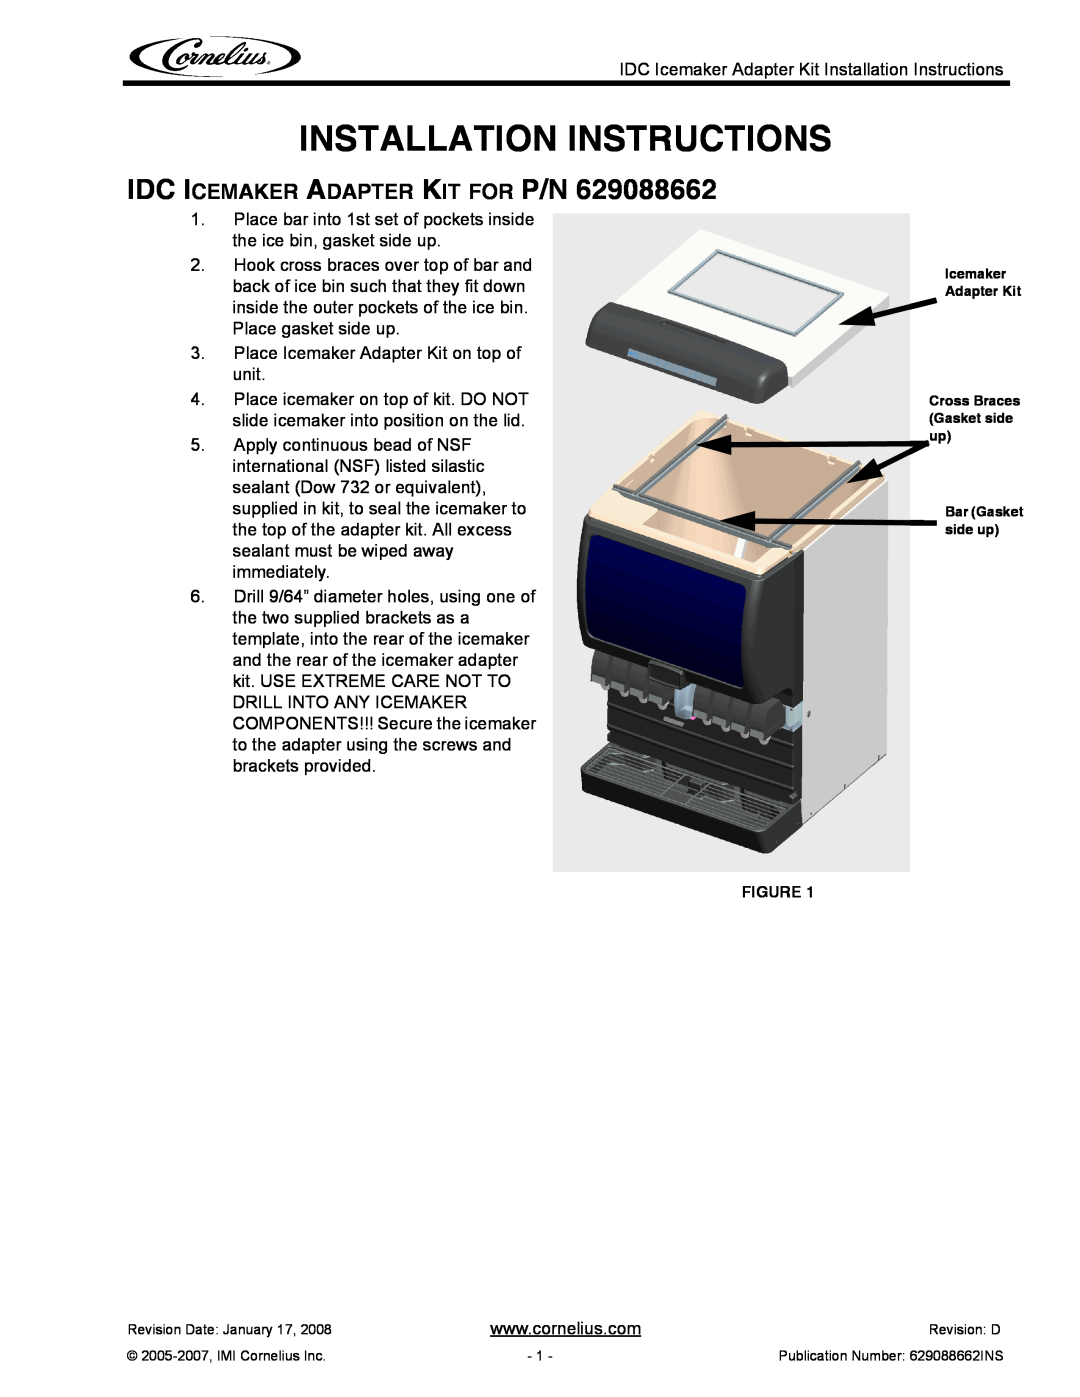 Cornelius P/N 629088662 installation instructions Installation Instructions, Idc Icemaker Adapter Kit For P/N 